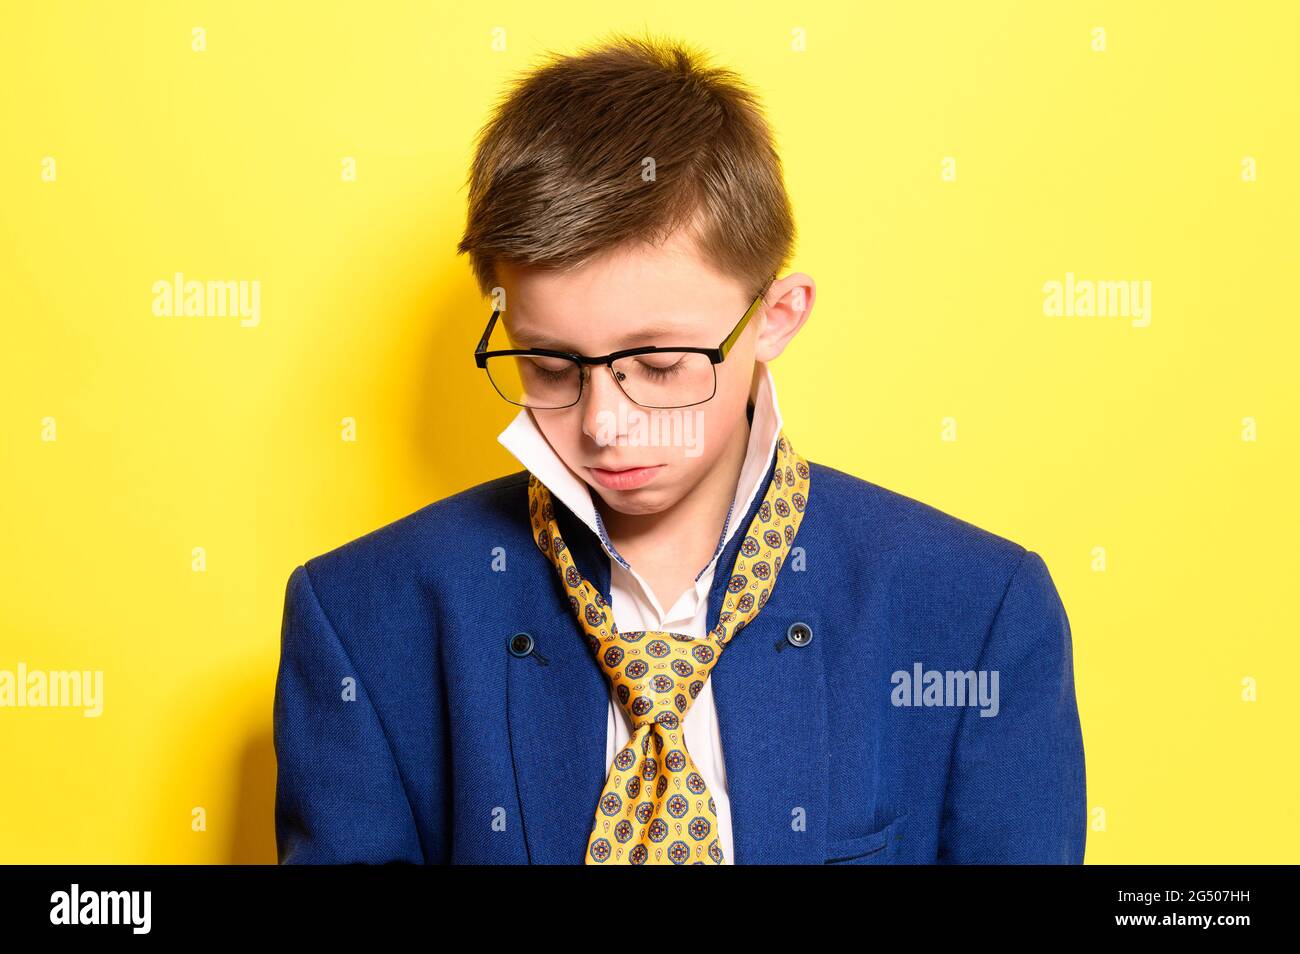 Portrait of a boy on a yellow background with a sad expression, an adult suit on a child. Stock Photo